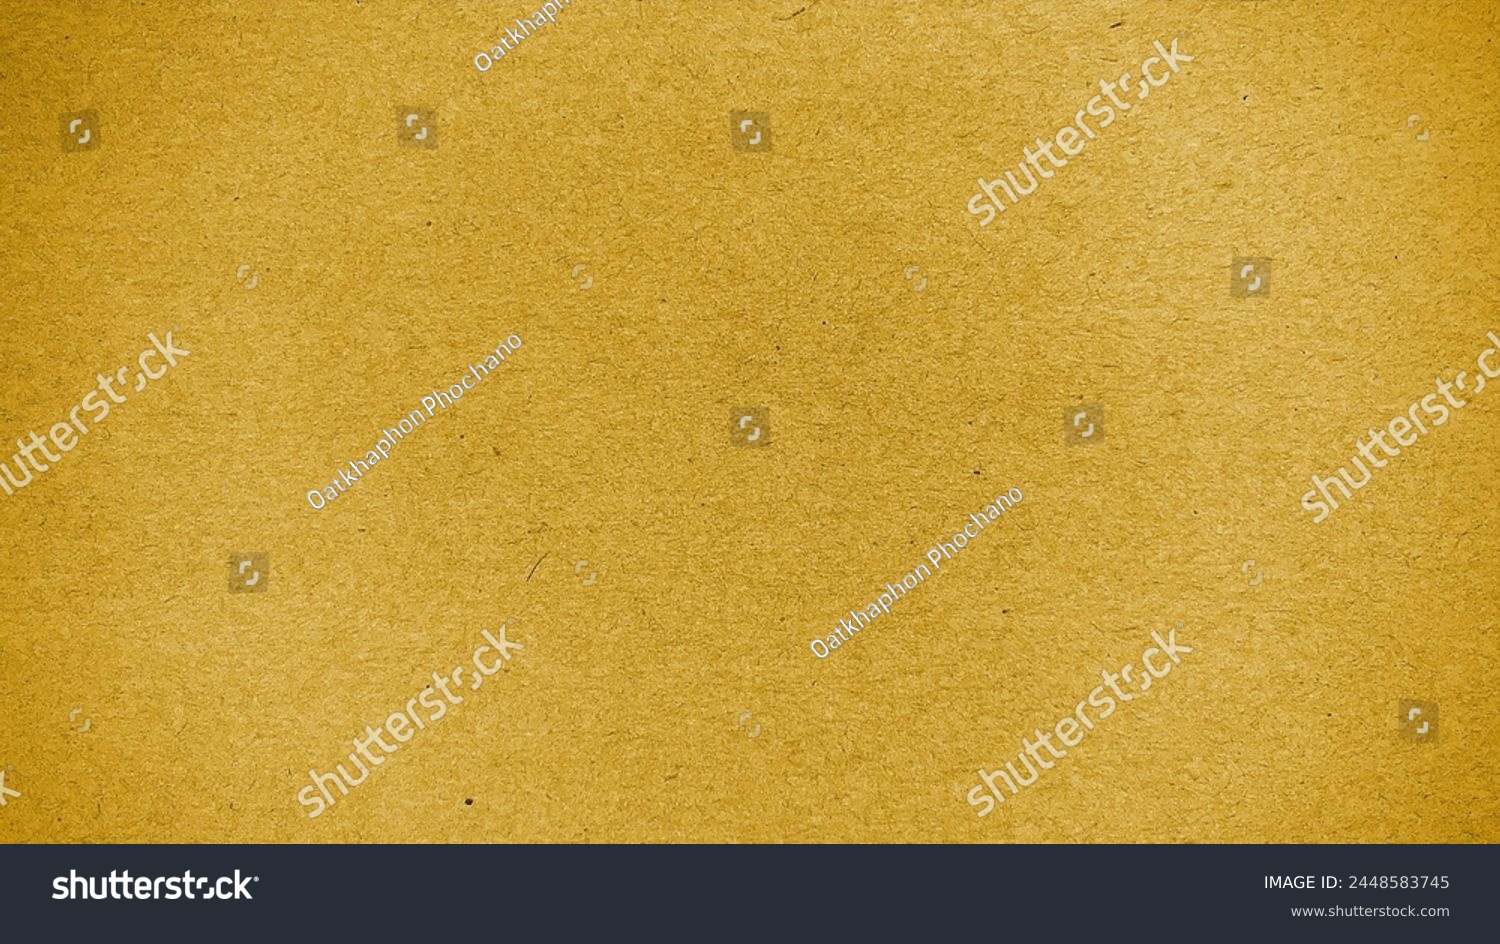 Brownish corrugated cardboard texture background. Brownish paper cardboard with a soft color. Brownish corrugated cardboard texture is useful as a background. Paper background texture. #2448583745